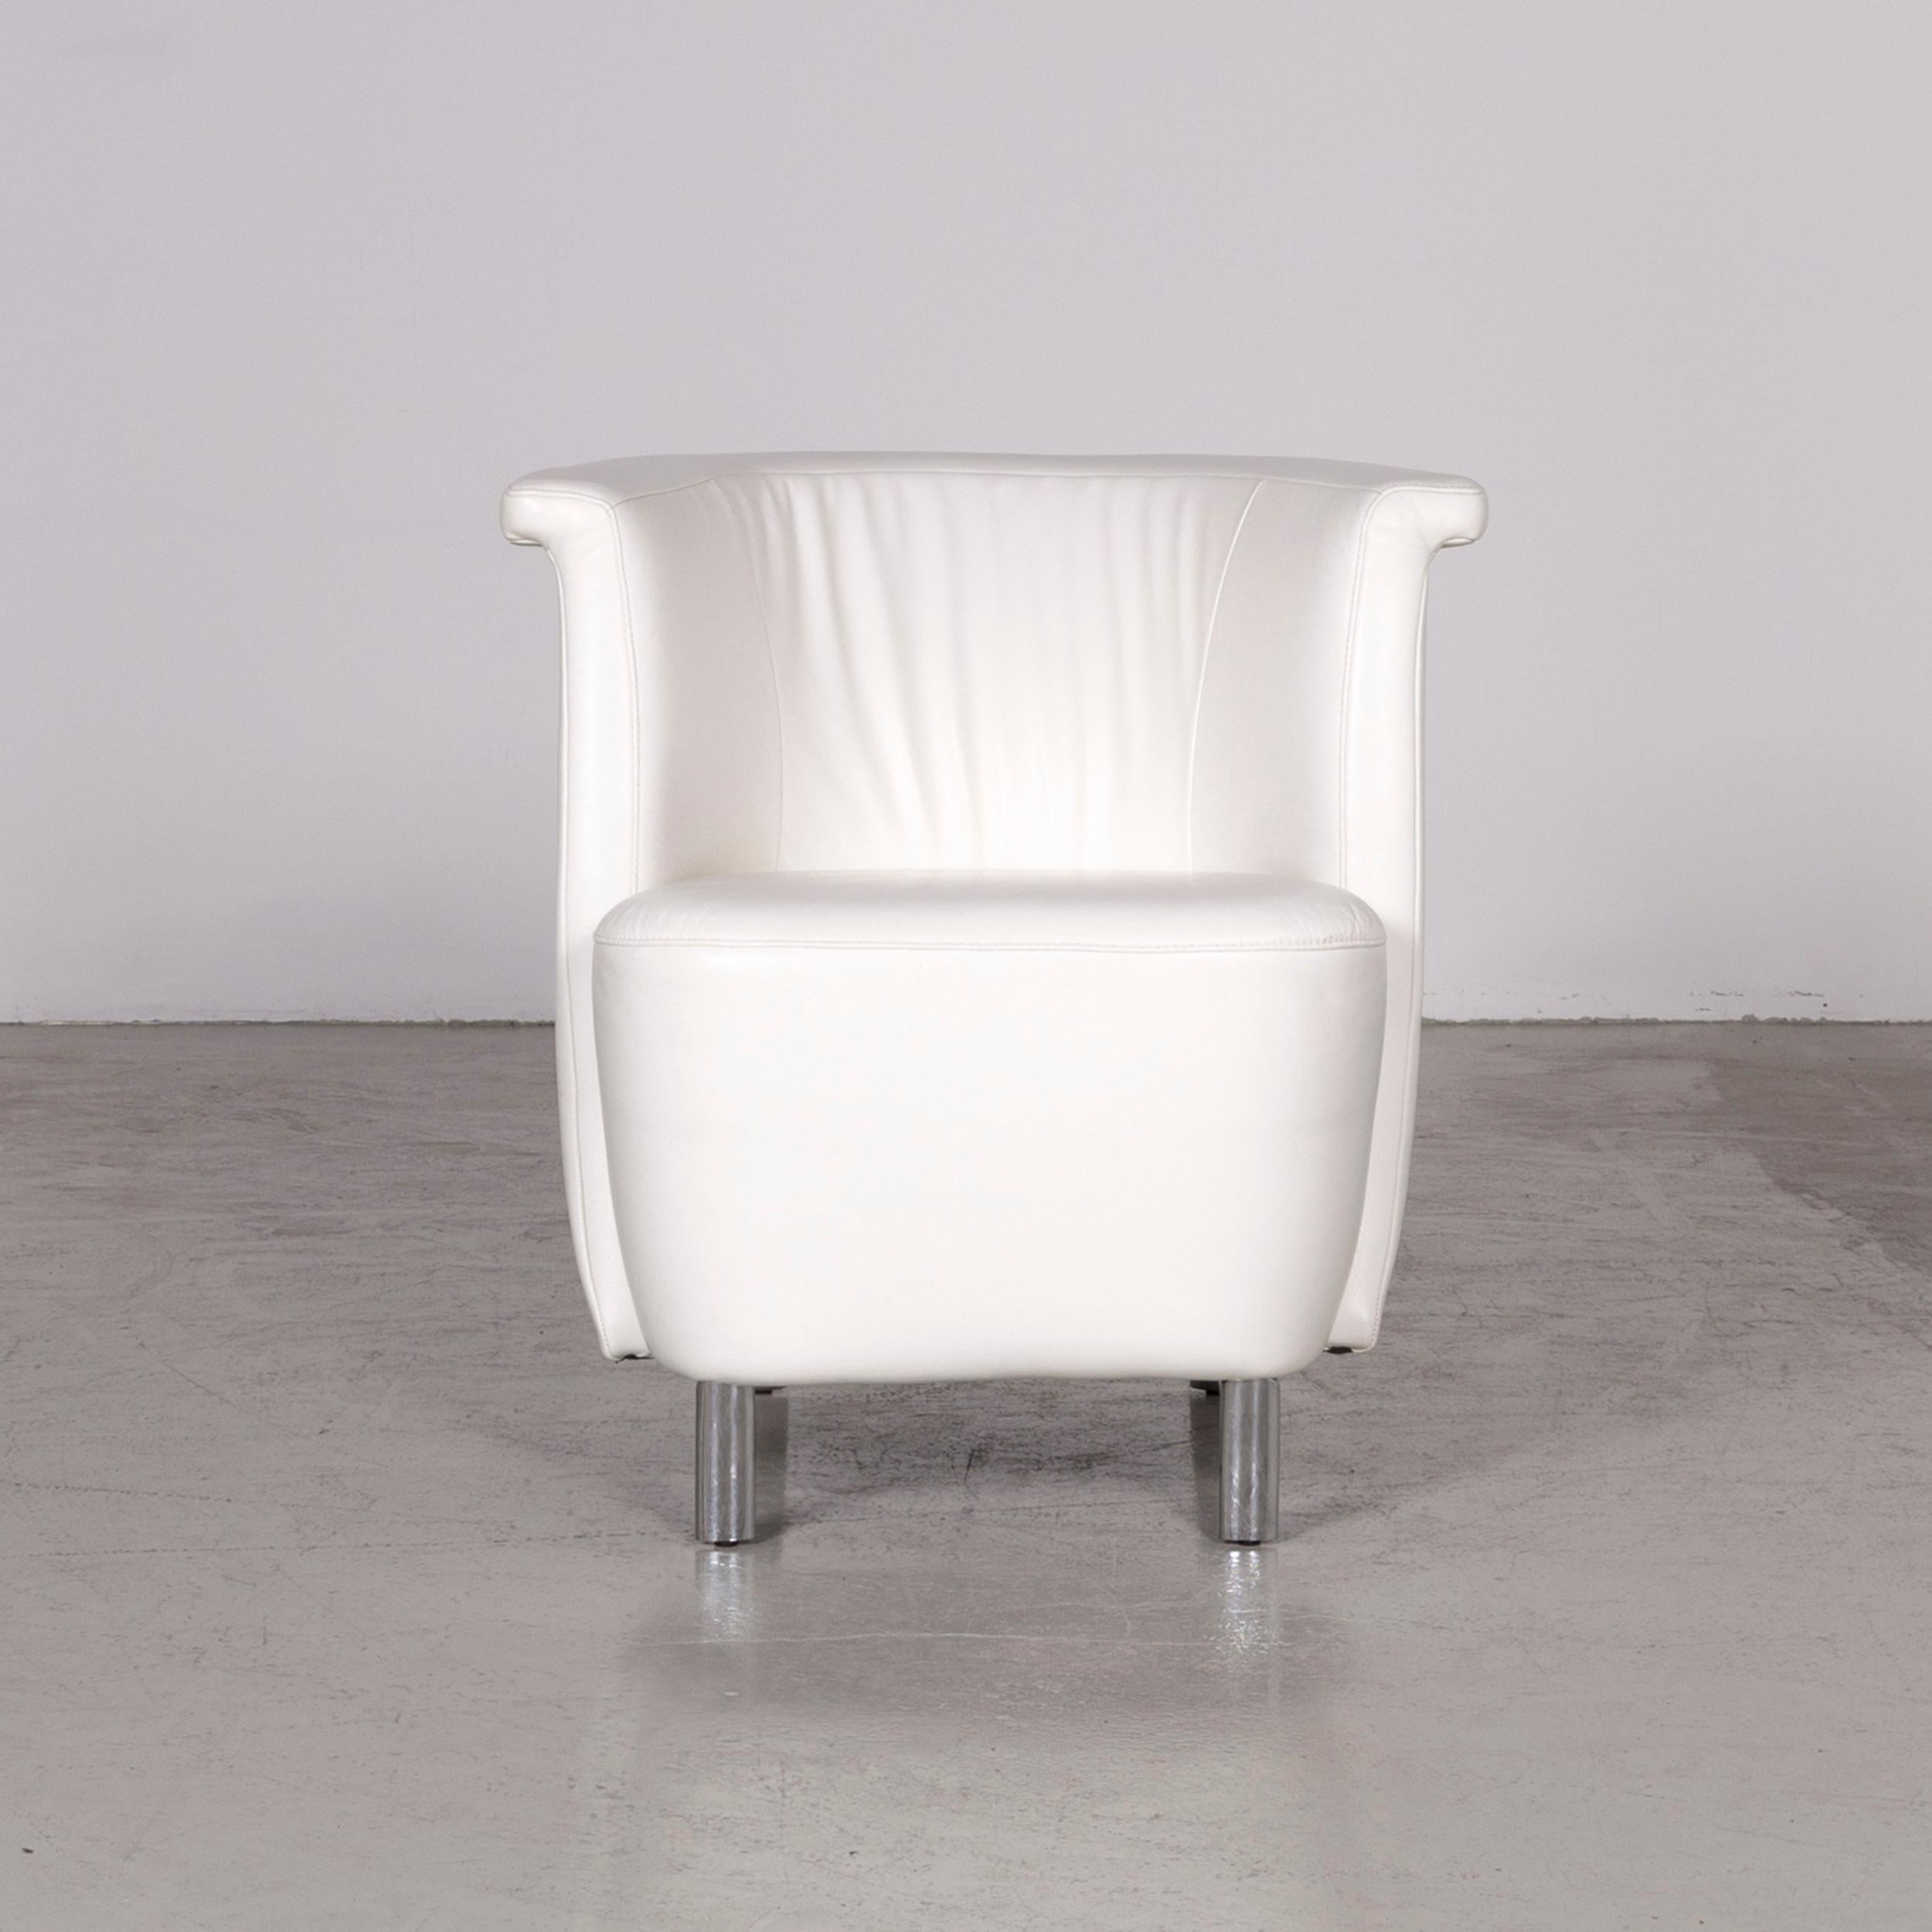 Koinor Infinity V Designer Leather Armchair Set White In Good Condition For Sale In Cologne, DE